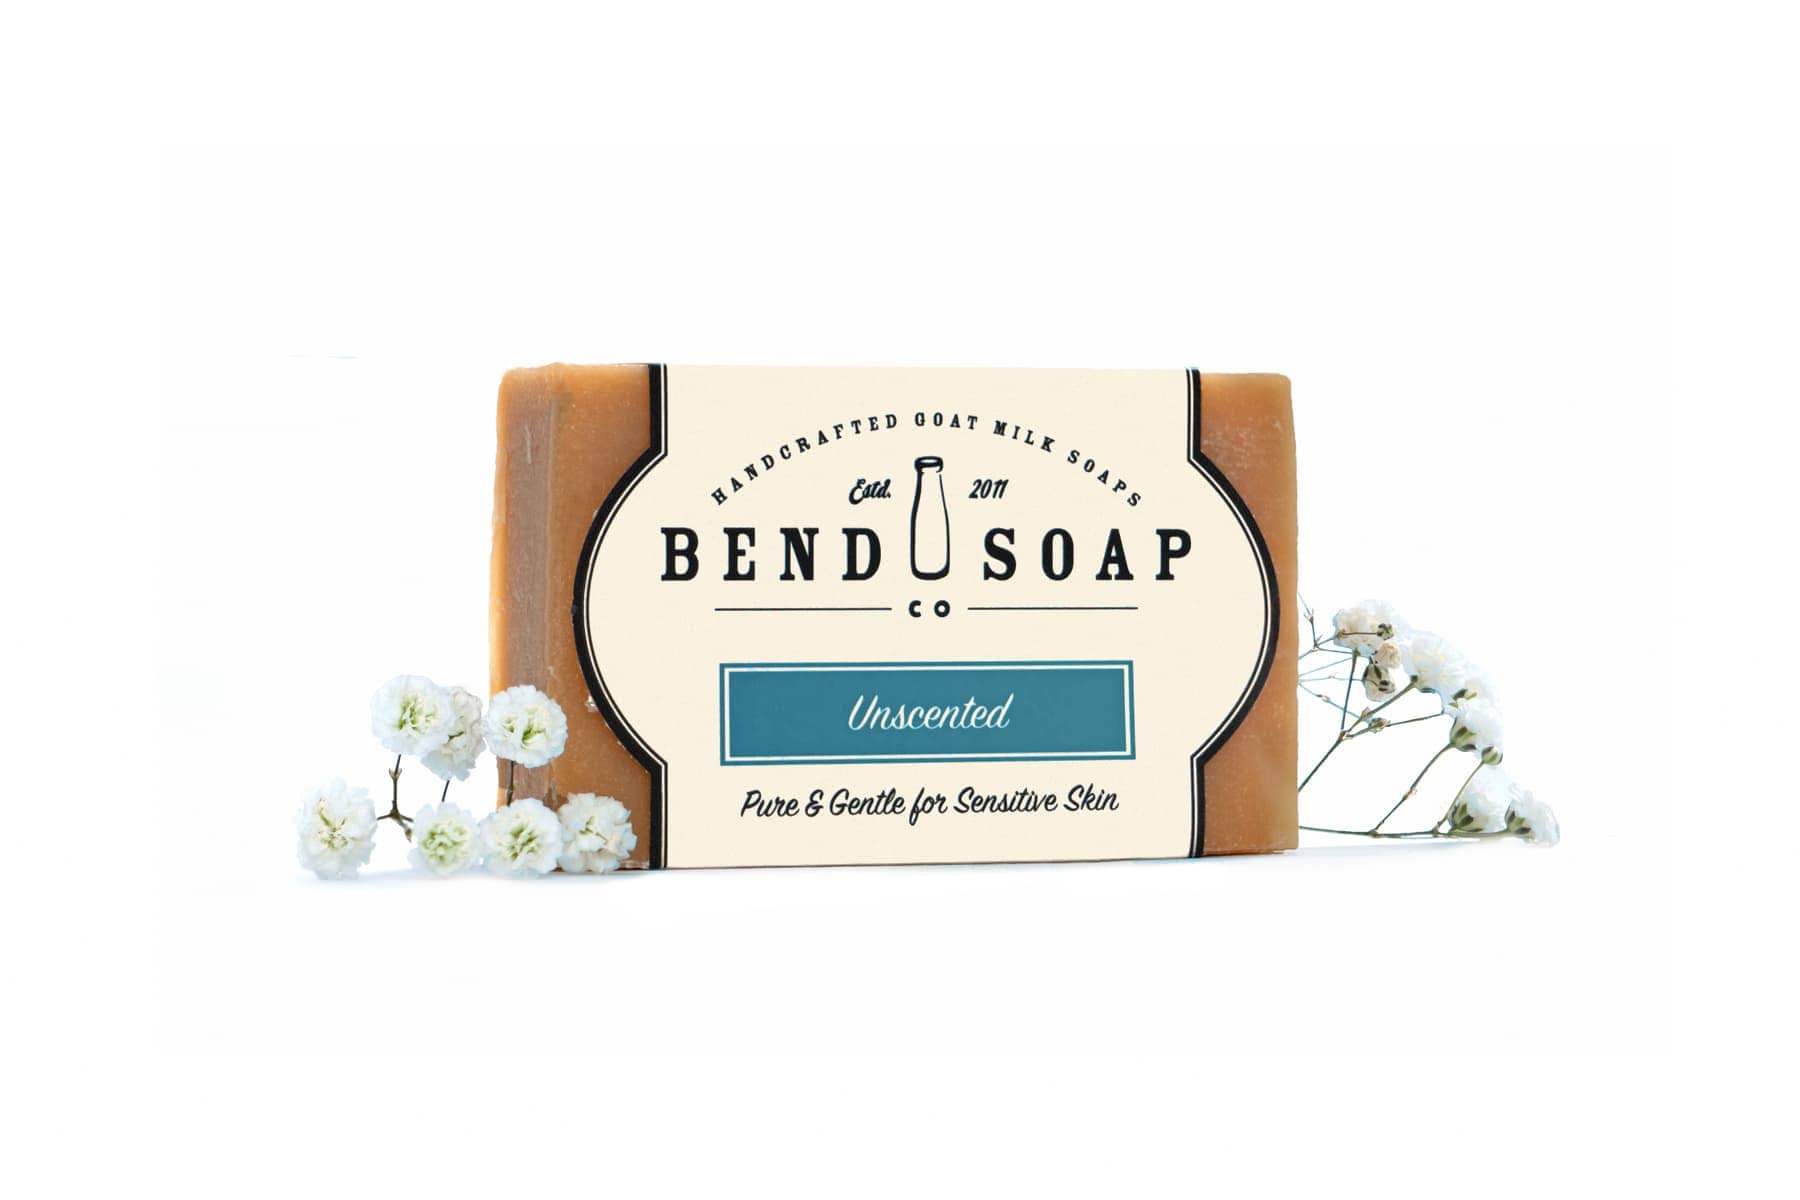 Skin Said Yes Goat Milk Soap Base - Experience the Unmatchable